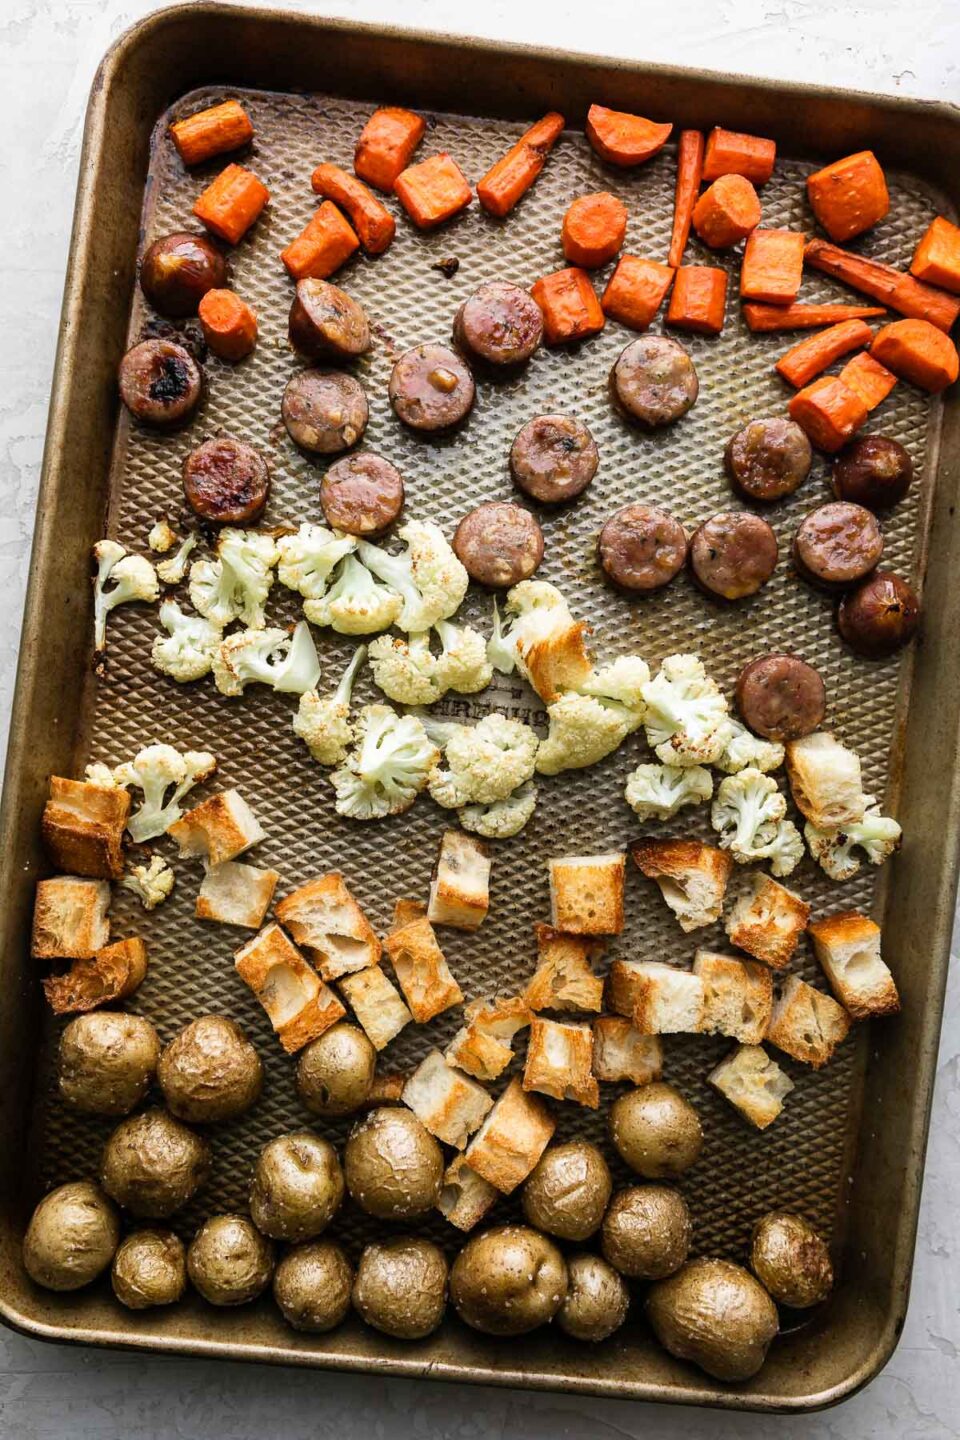 How to make Fondue for Two, Steps 2 & 3, roast the fondue dippers. Roasted and golden brown carrots, baby potatoes, cauliflower, bread, and chicken sausage, cut into bite-sized pieces, are all arranged on a baking sheet. The baking sheet sits atop a creamy white textured surface.